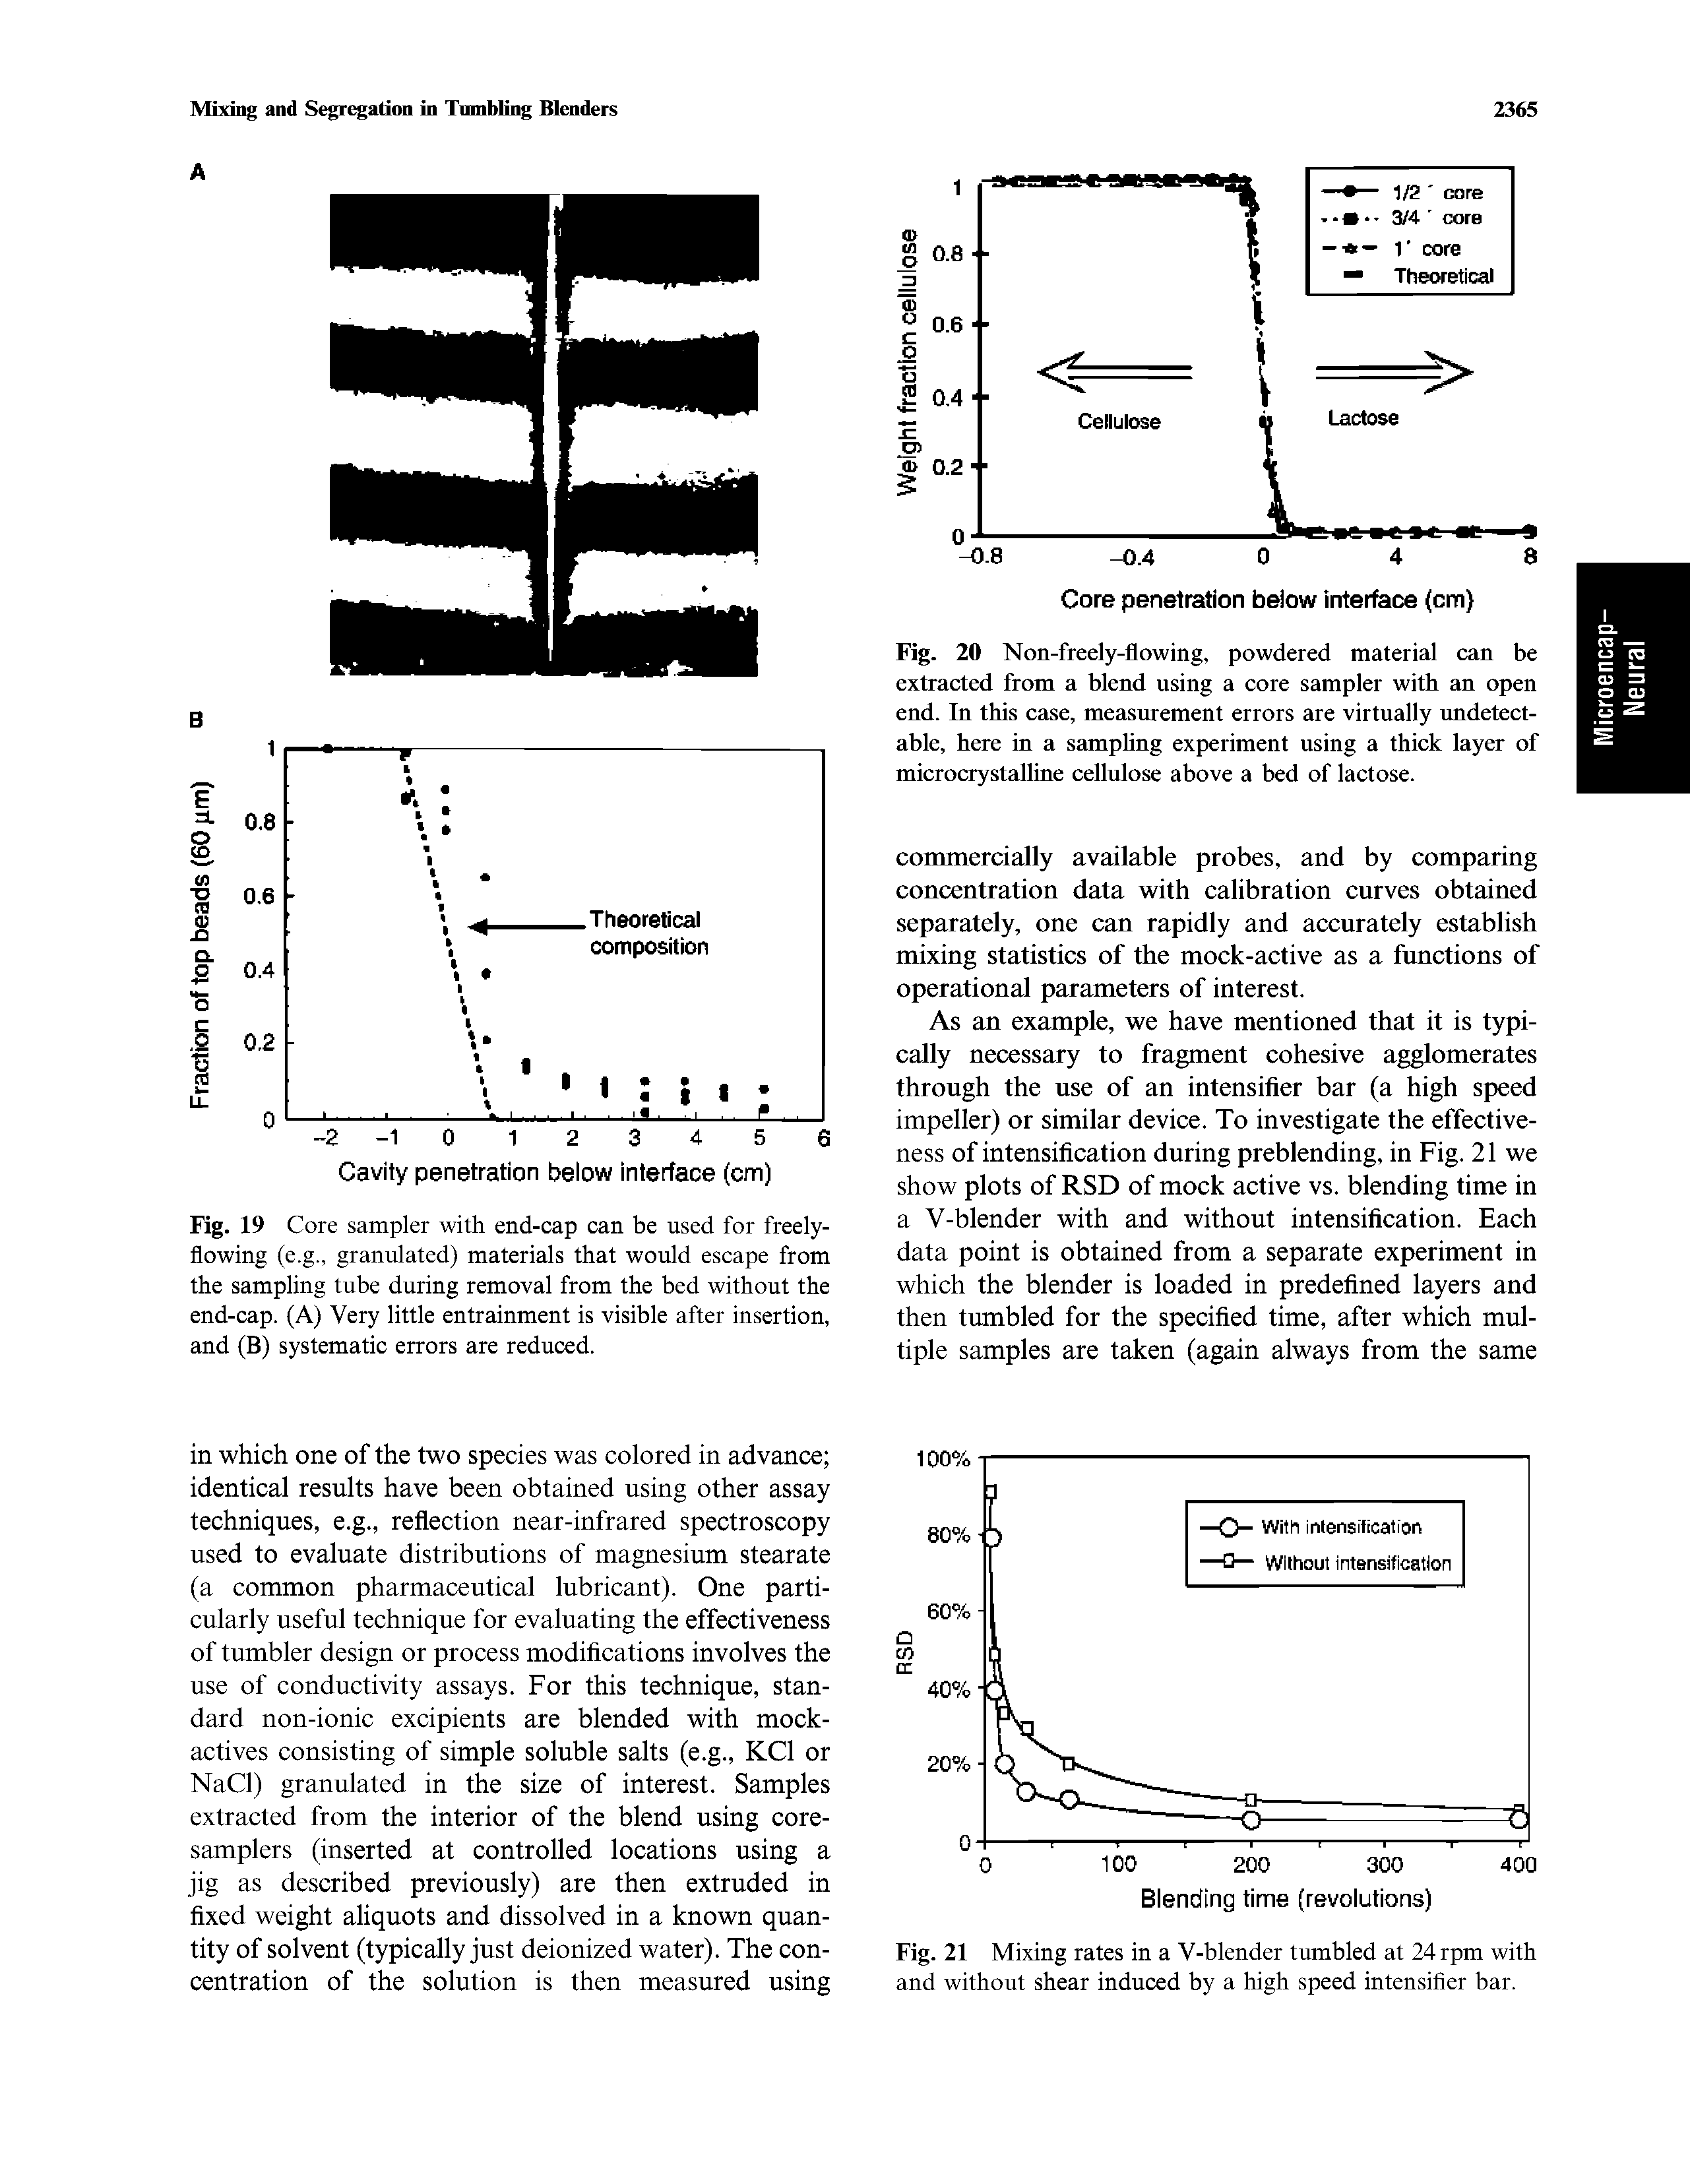 Fig. 21 Mixing rates in a V-blender tumbled at 24 rpm with and without shear induced by a high speed intensifier bar.